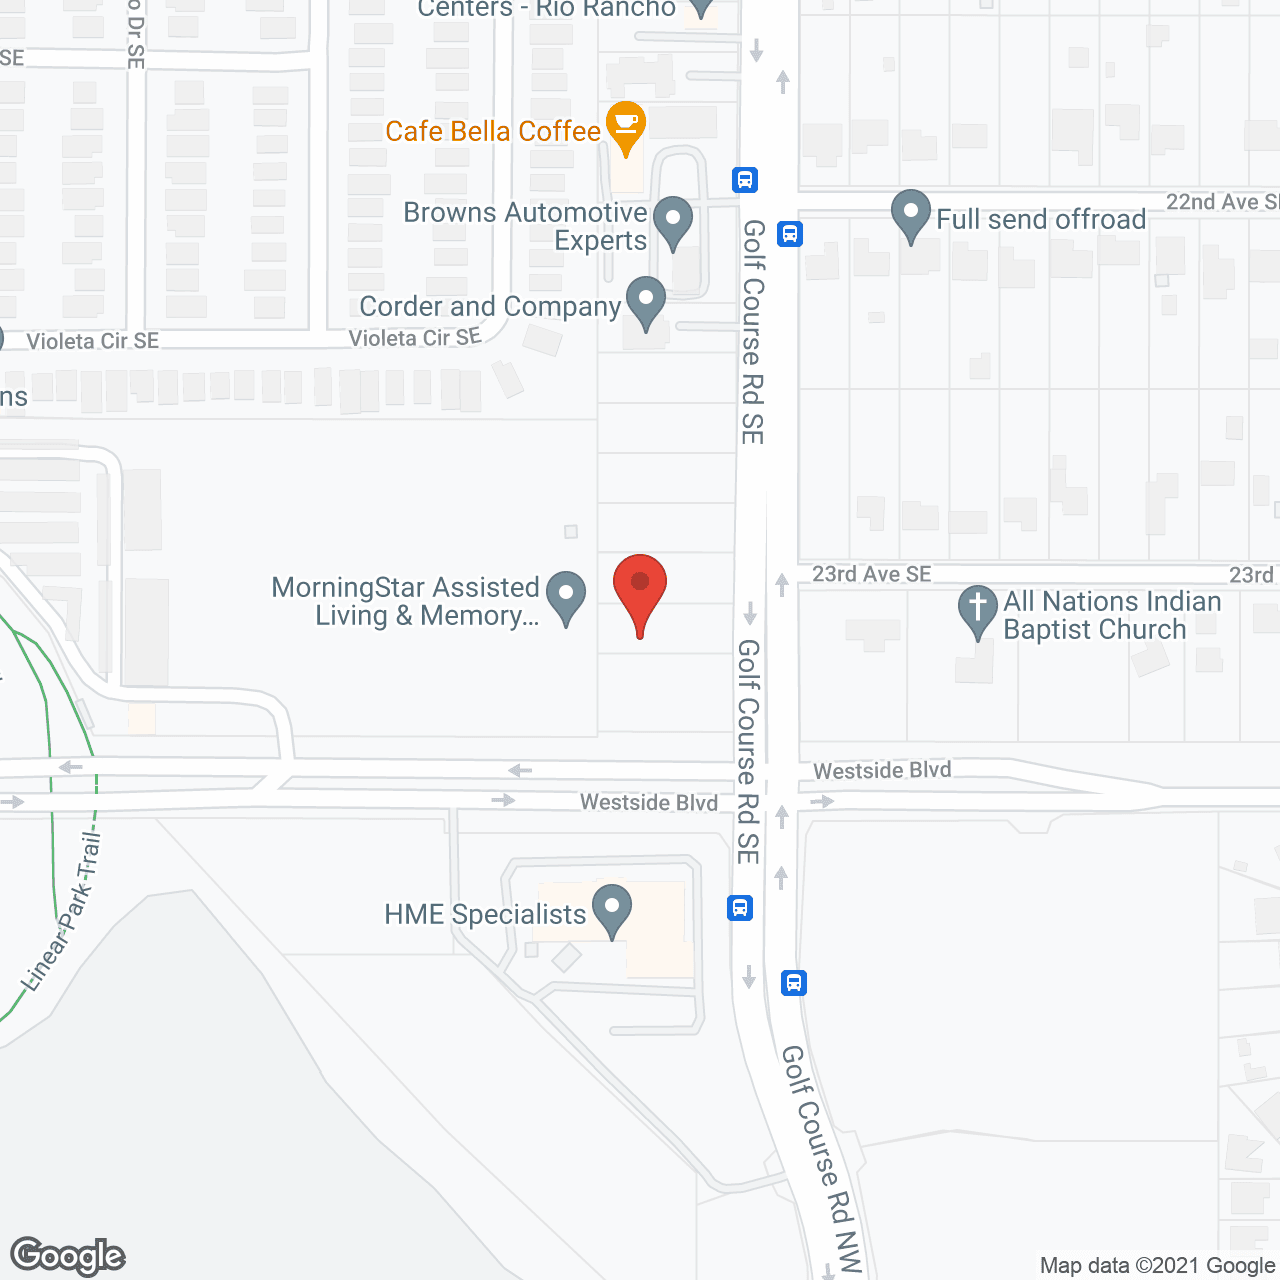 MorningStar Assisted Living and Memory Care of Rio Rancho in google map